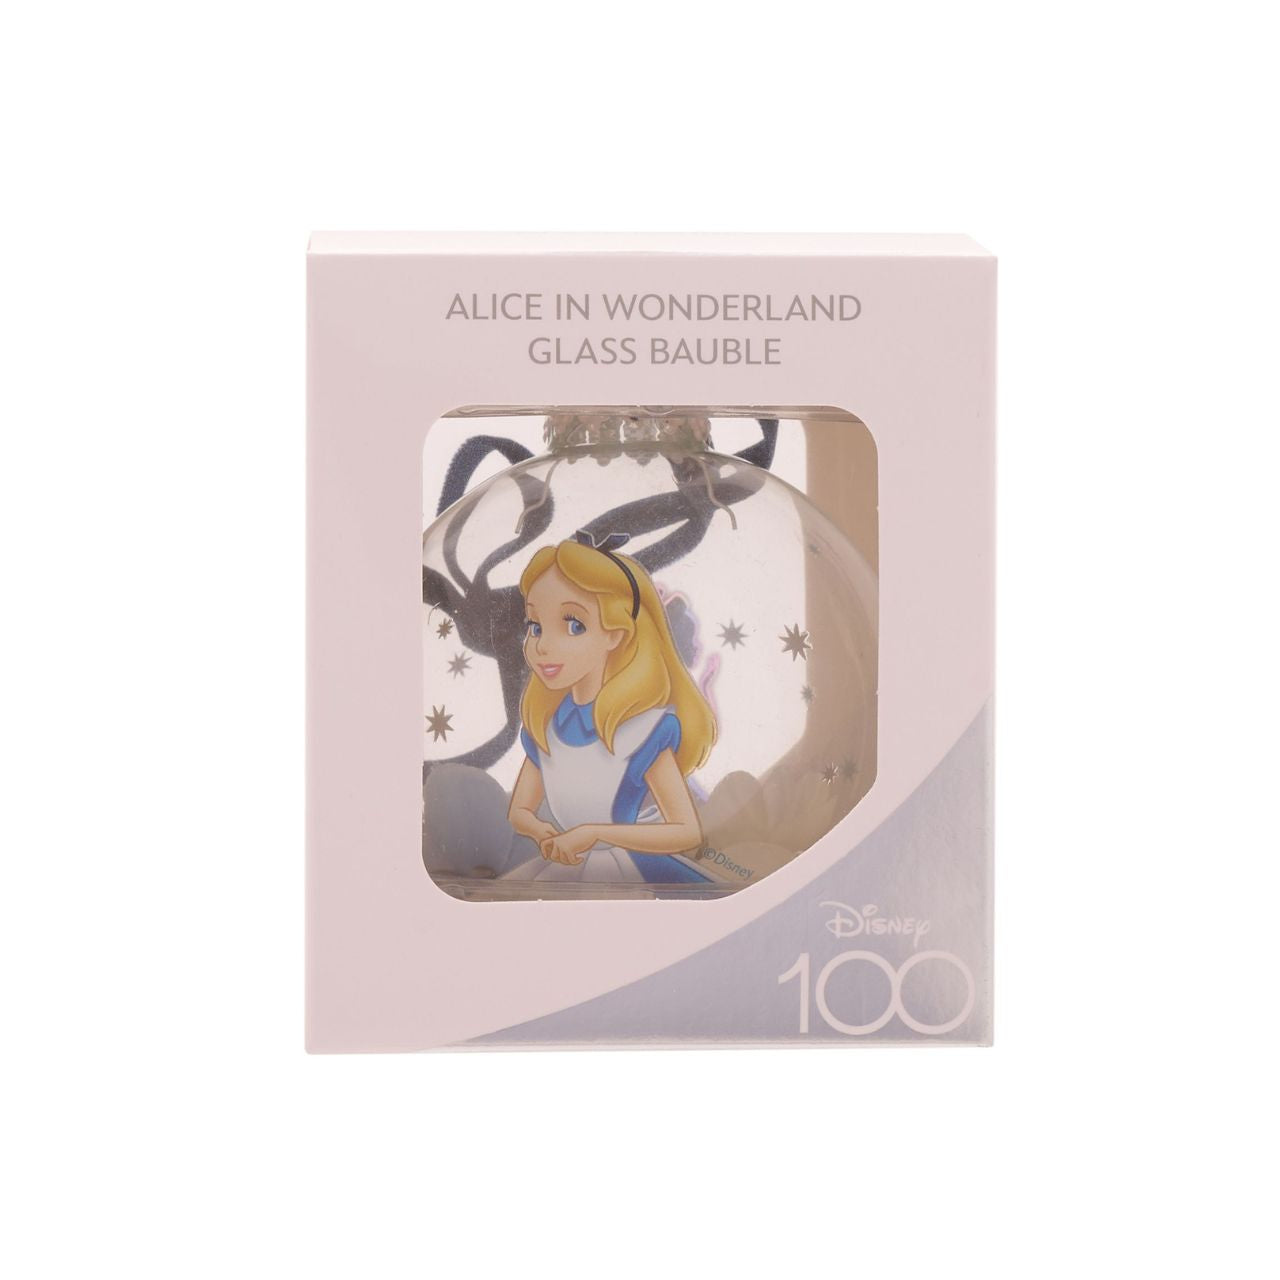 Disney 100th Anniversary Bauble - Alice  An Alice in Wonderland glass bauble from Disney 100 by DISNEY.  This limited edition tree decoration captures the true magic of Disney on its centenary and can be enjoyed by fans of all ages at Christmas.